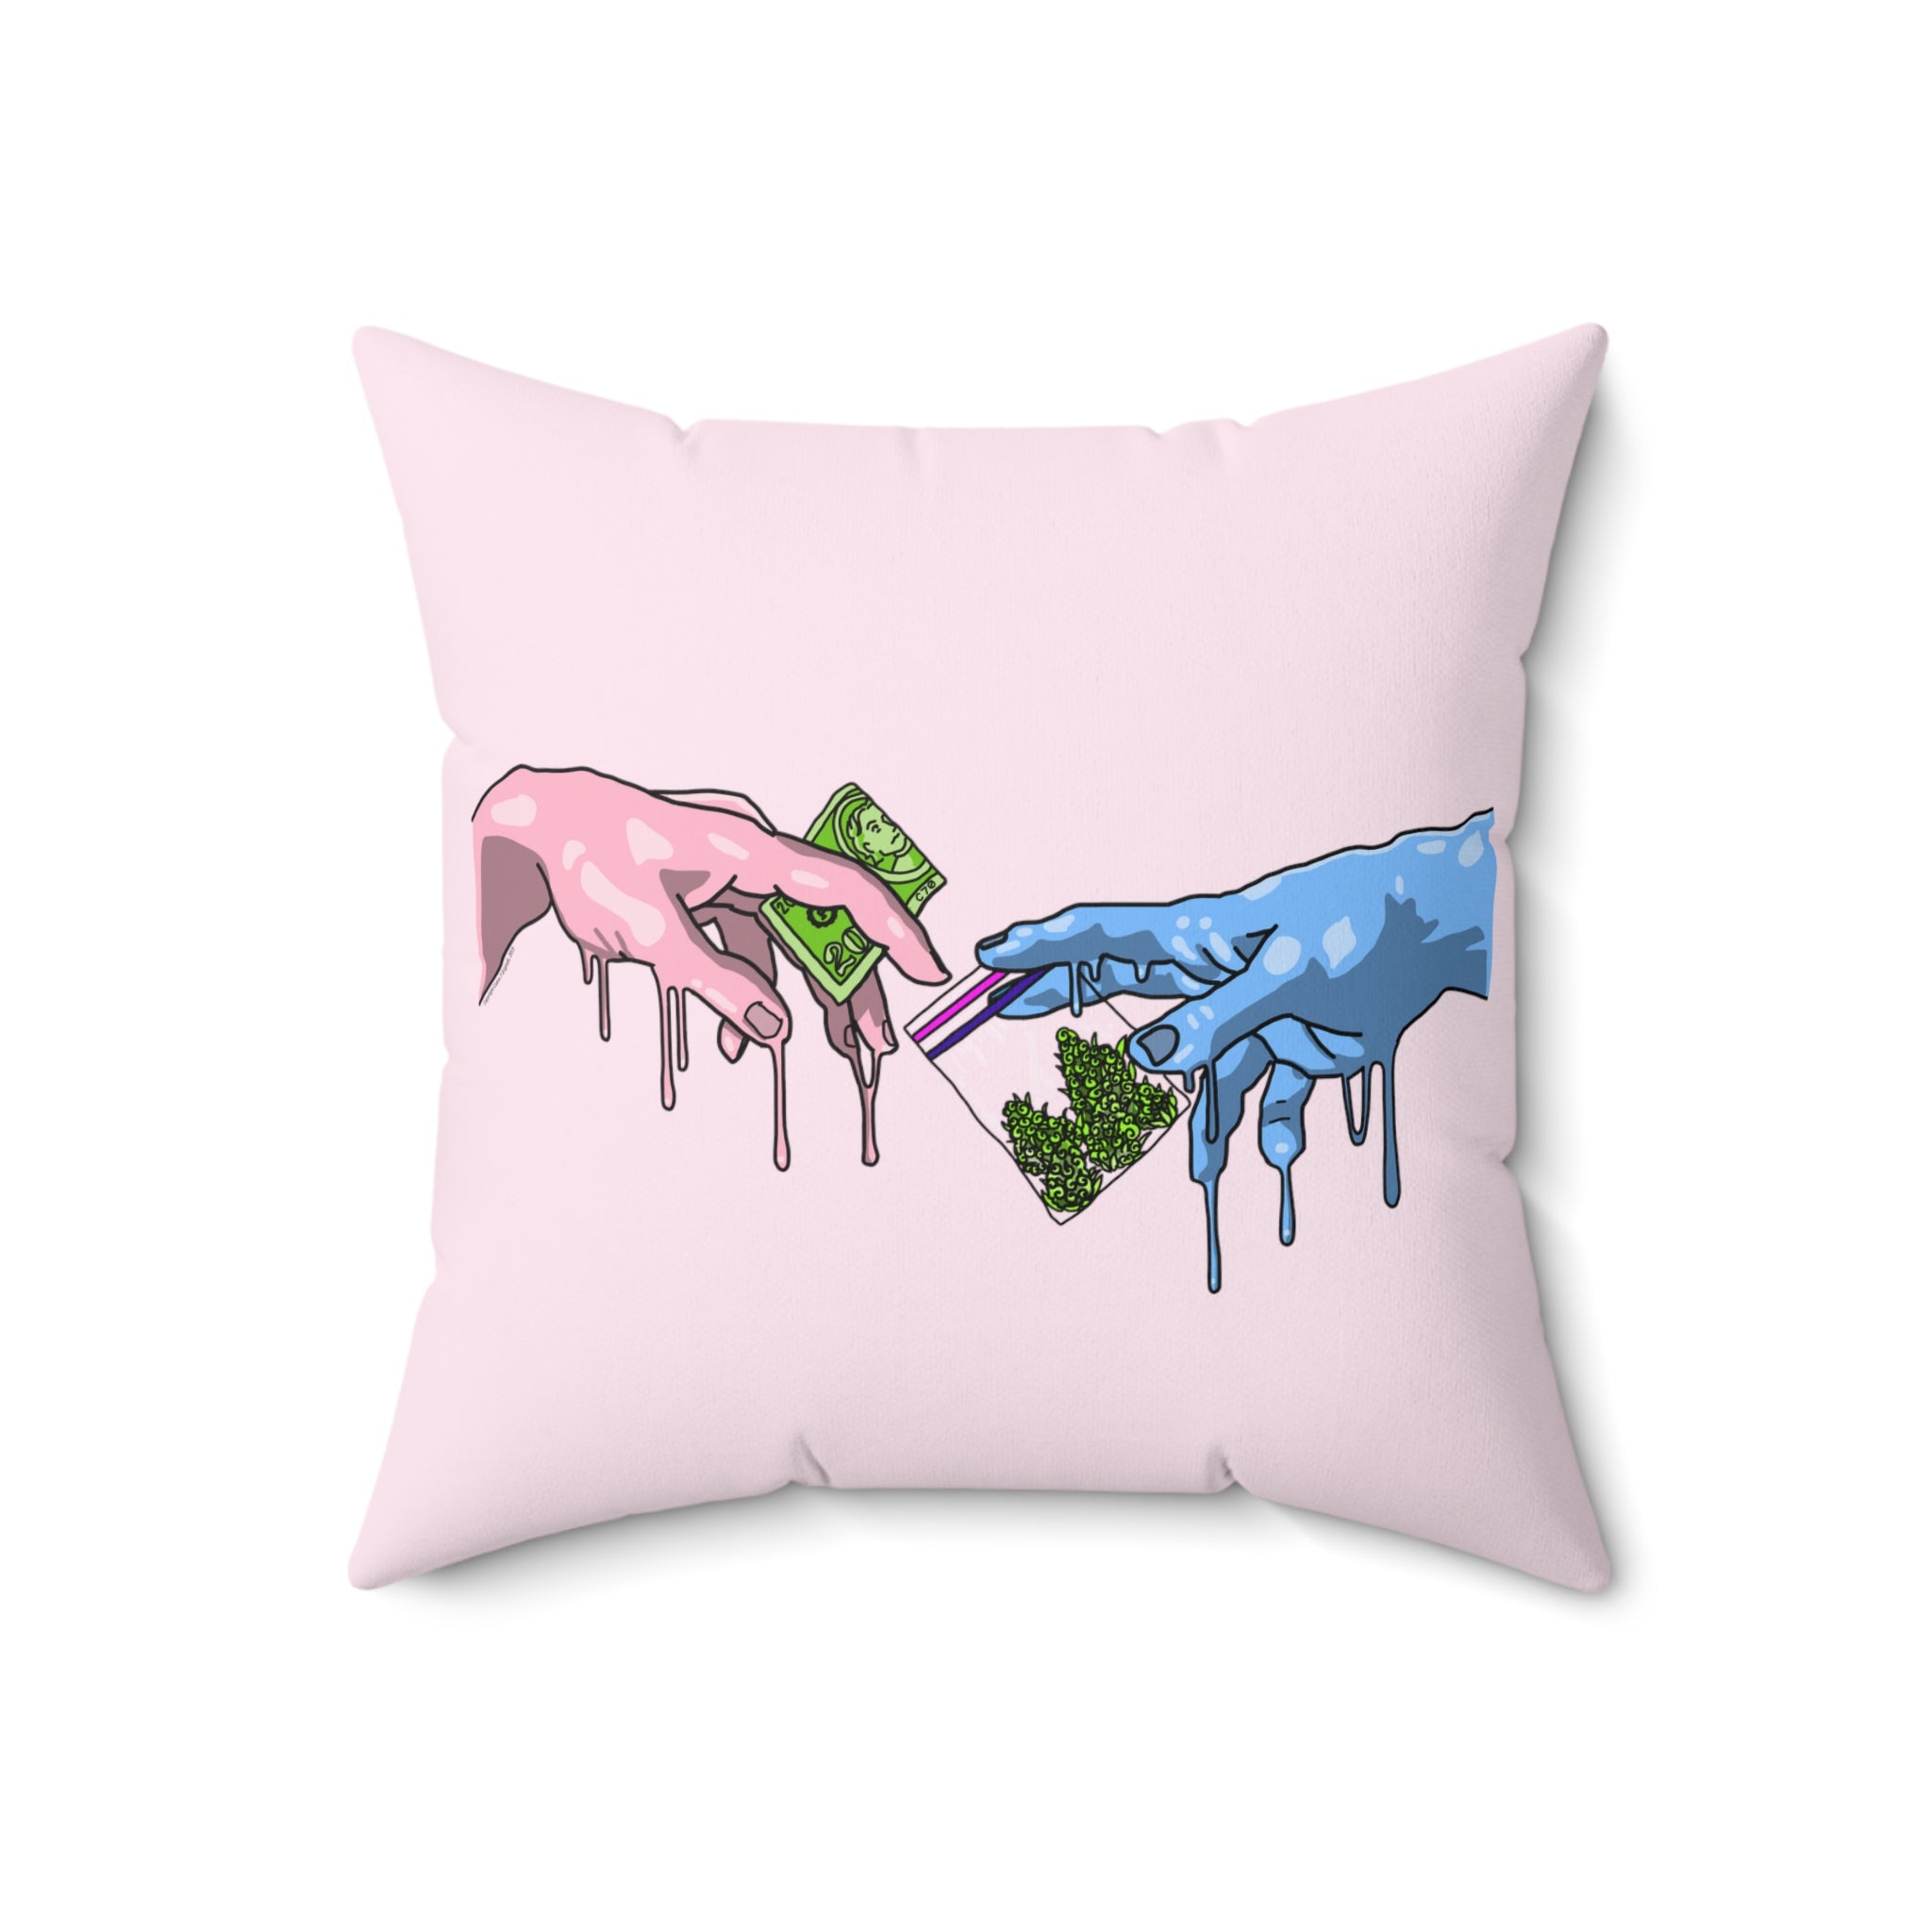 Michelangelo's Mary Throw Pillow